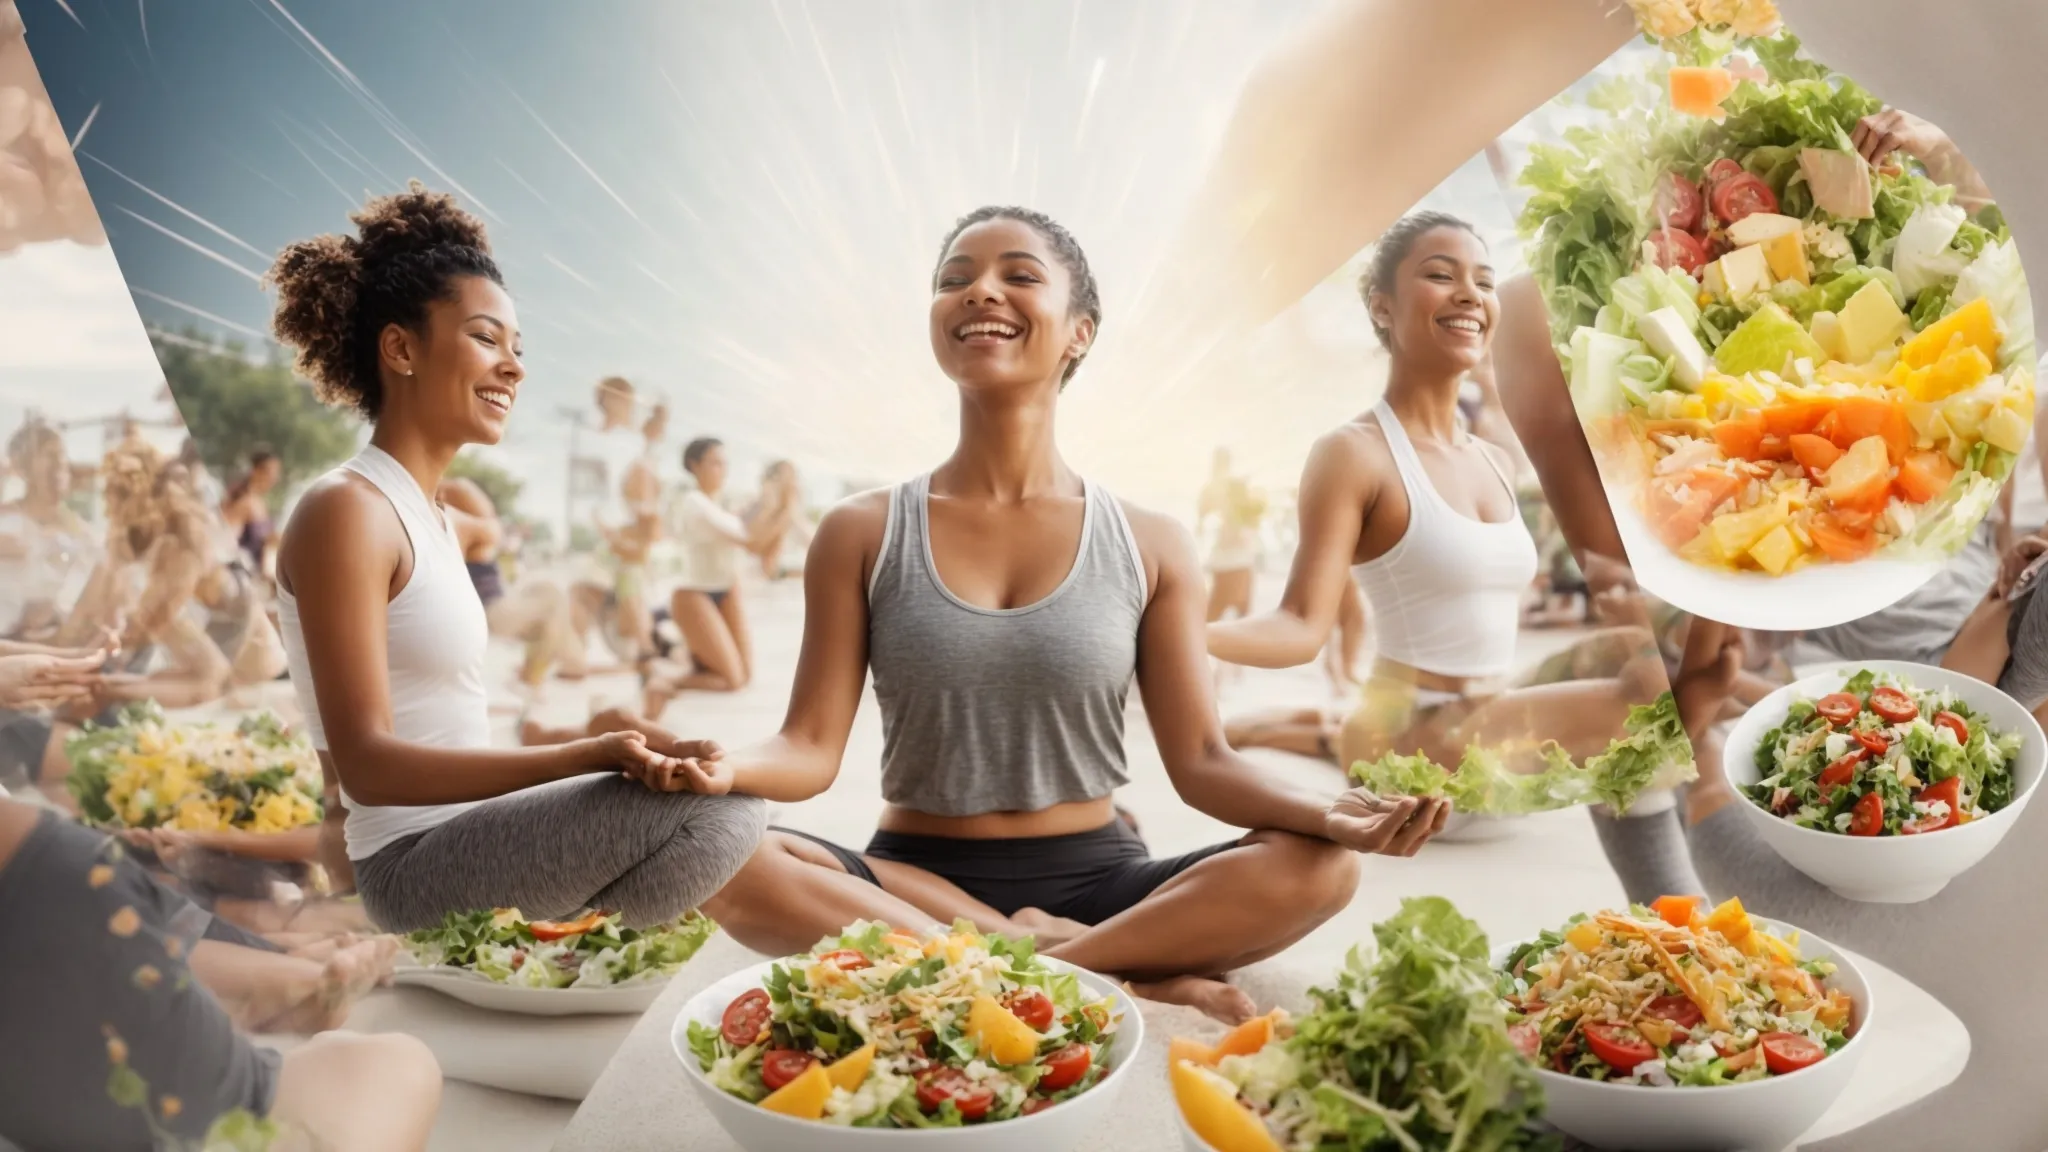 a collage of smiling people engaging in various healthy activities such as yoga, jogging, and eating salads, overlaid with subtle, abstract digital graphics representing data flow and analysis.